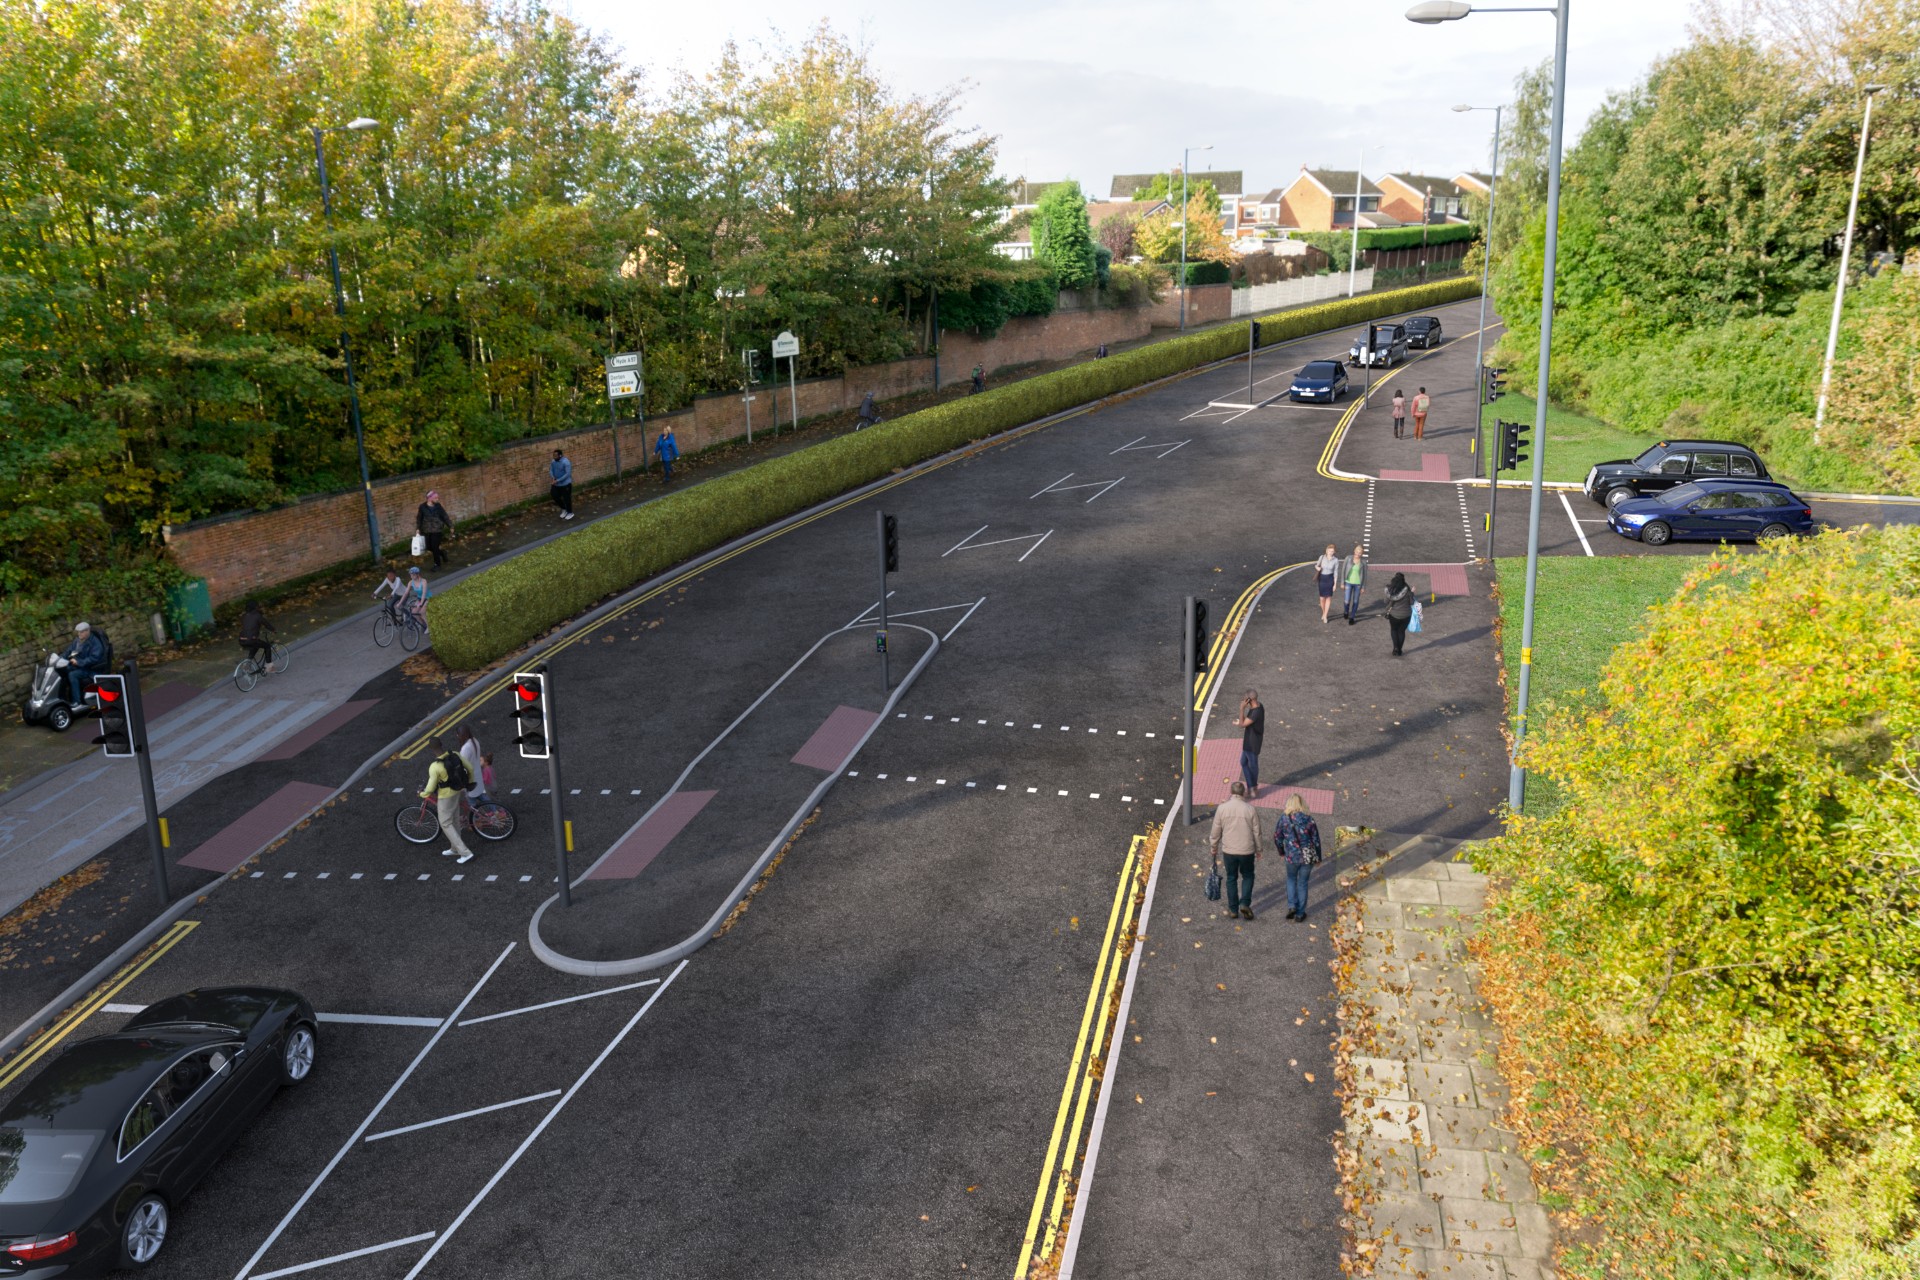 A visualisation of how Crown Point, Denton could look with cycling and walking improvements